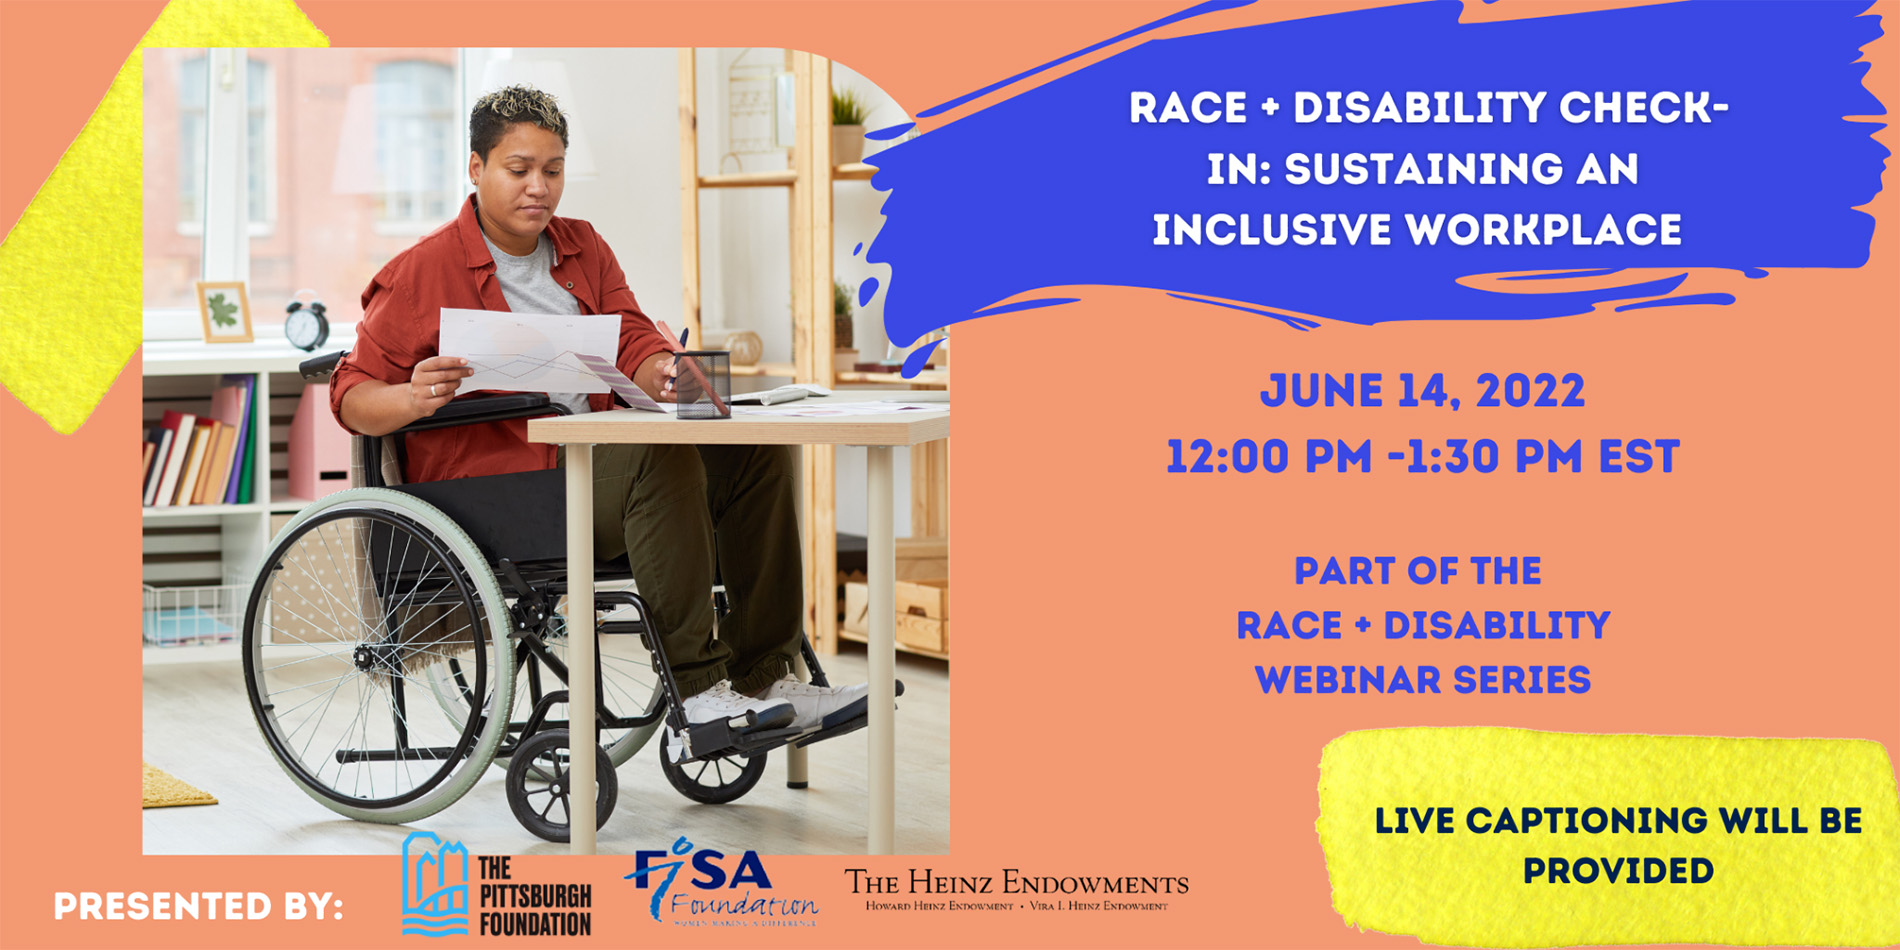 Race + Disability Check-in: Sustaining an Inclusive Workplace